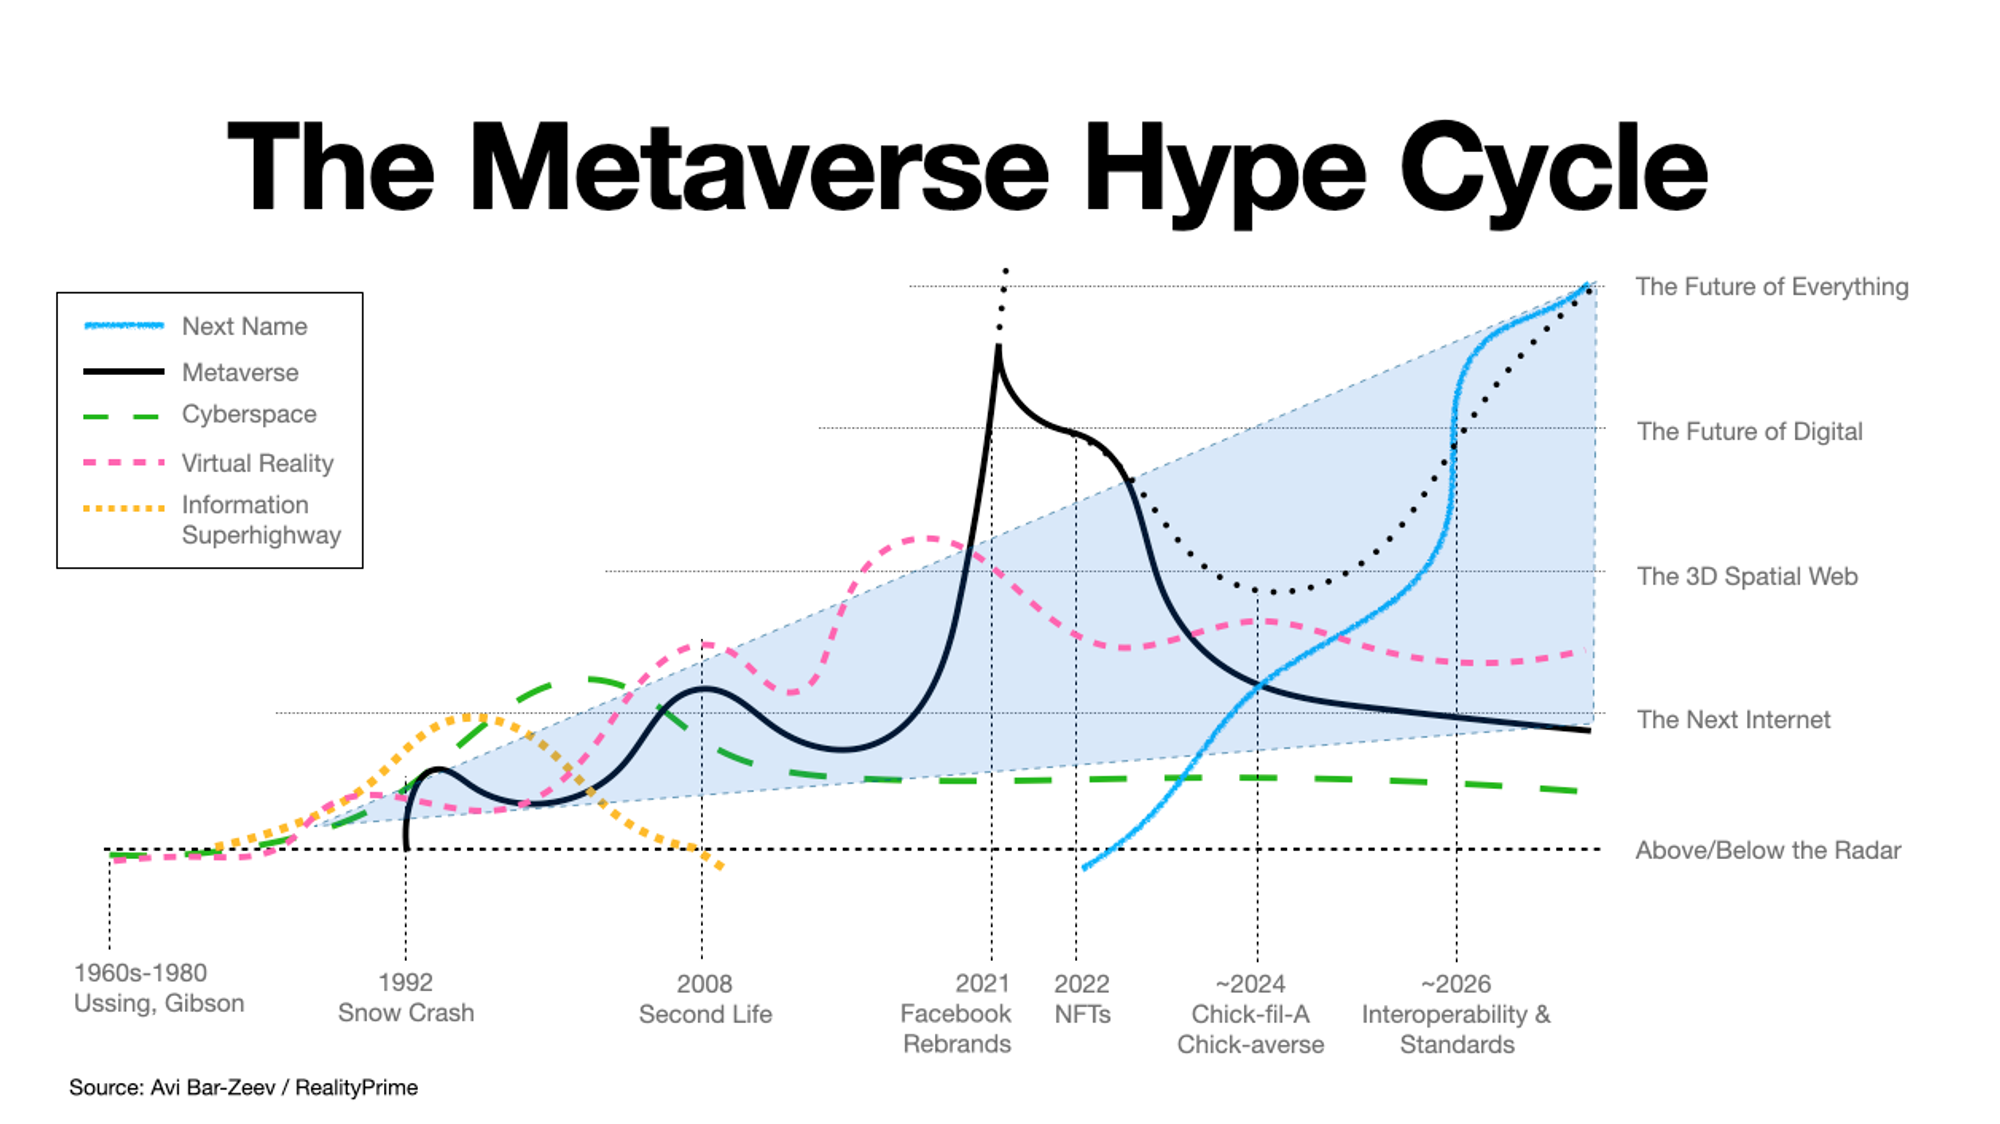 The metaverse hype cycle